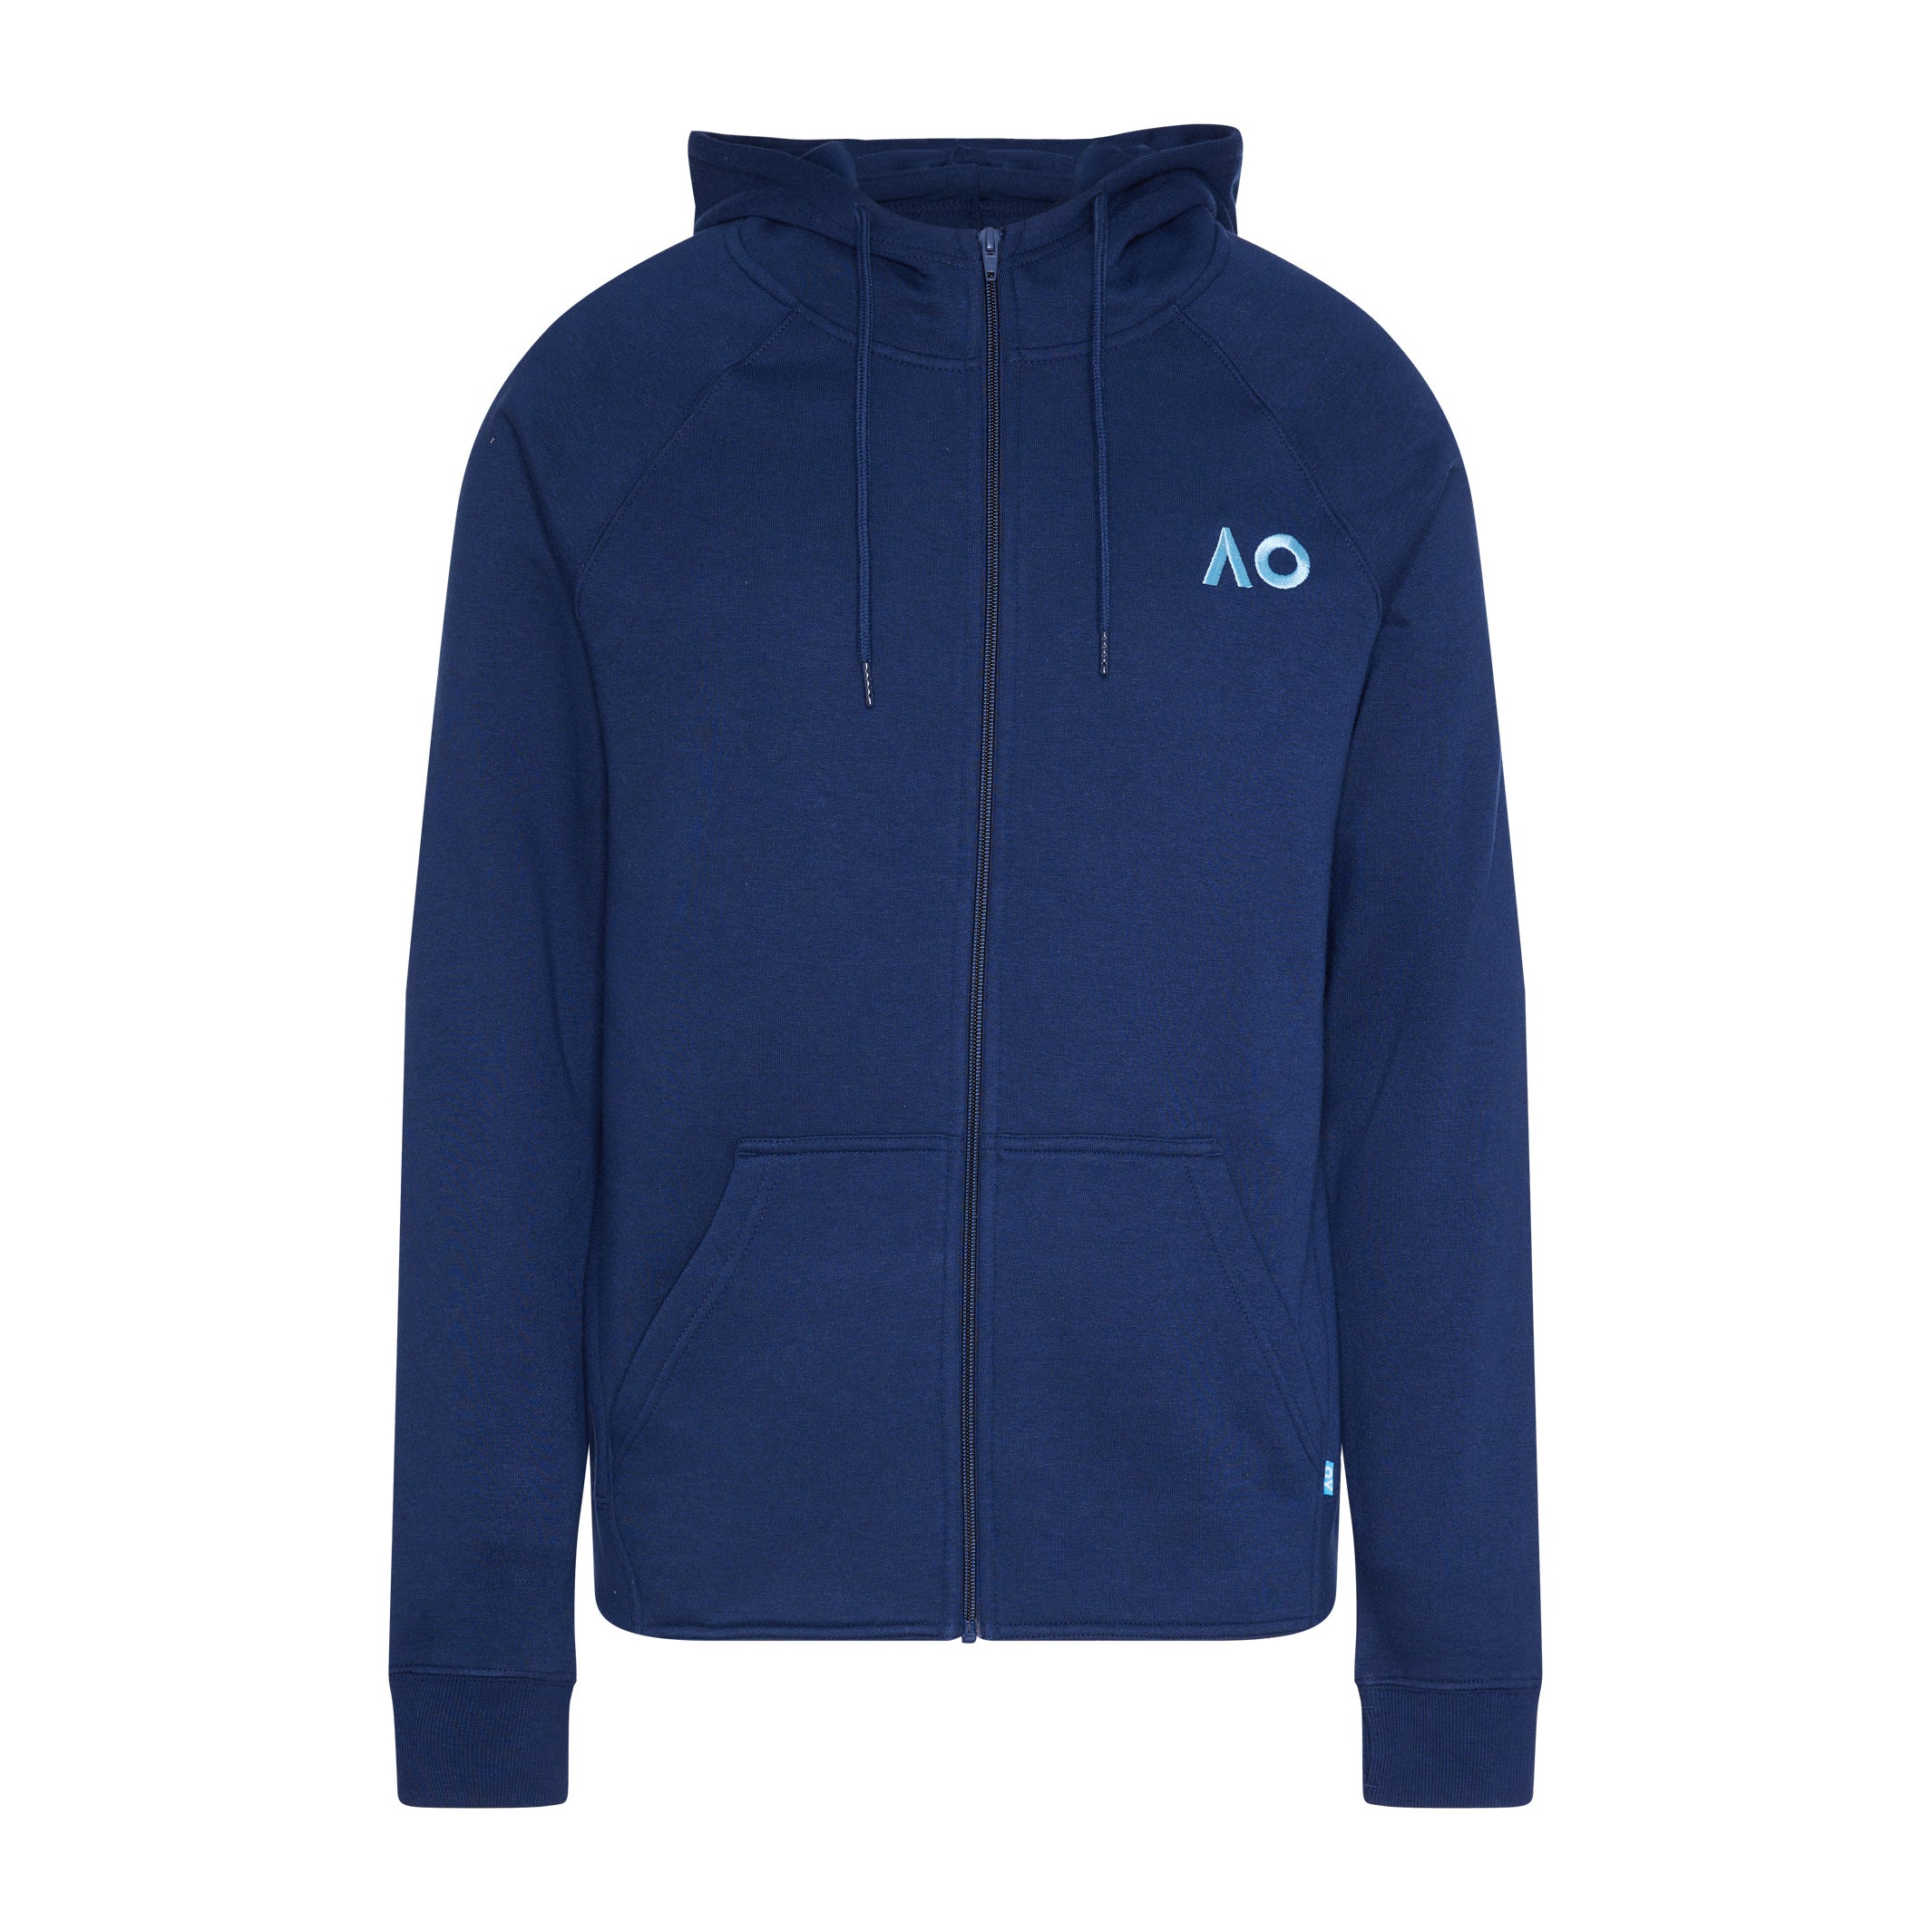 AO Men's Navy Hoodie with Drawstring